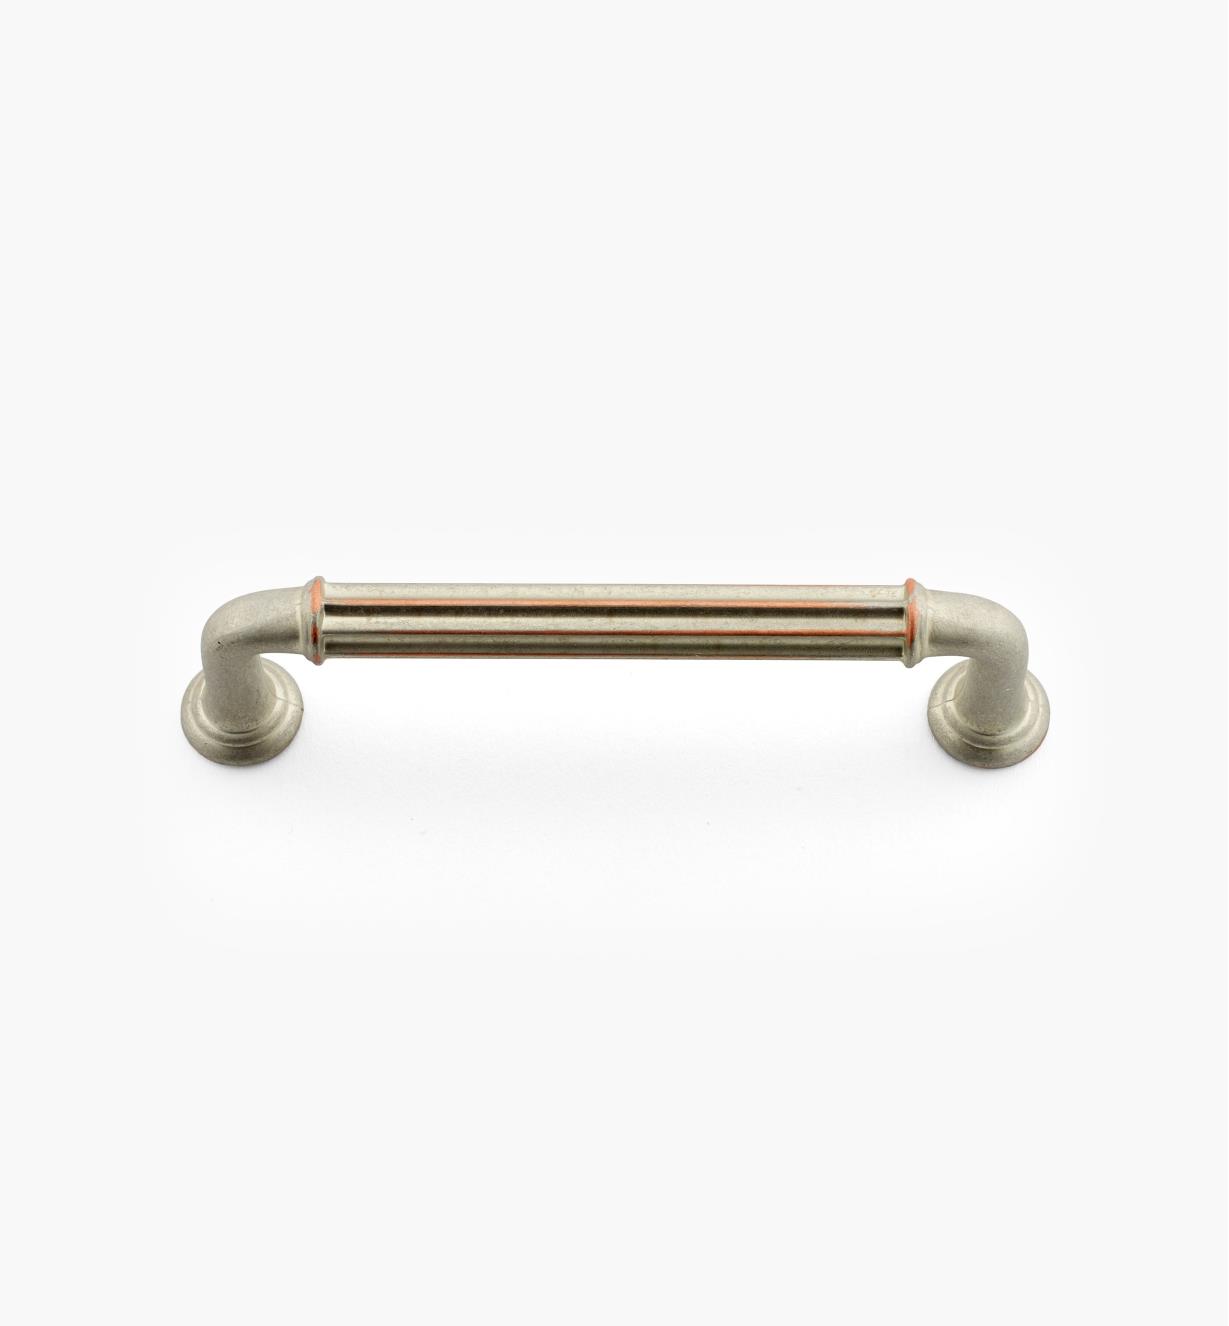 02A4592 - 96mm Weathered Nickel-Copper Handle